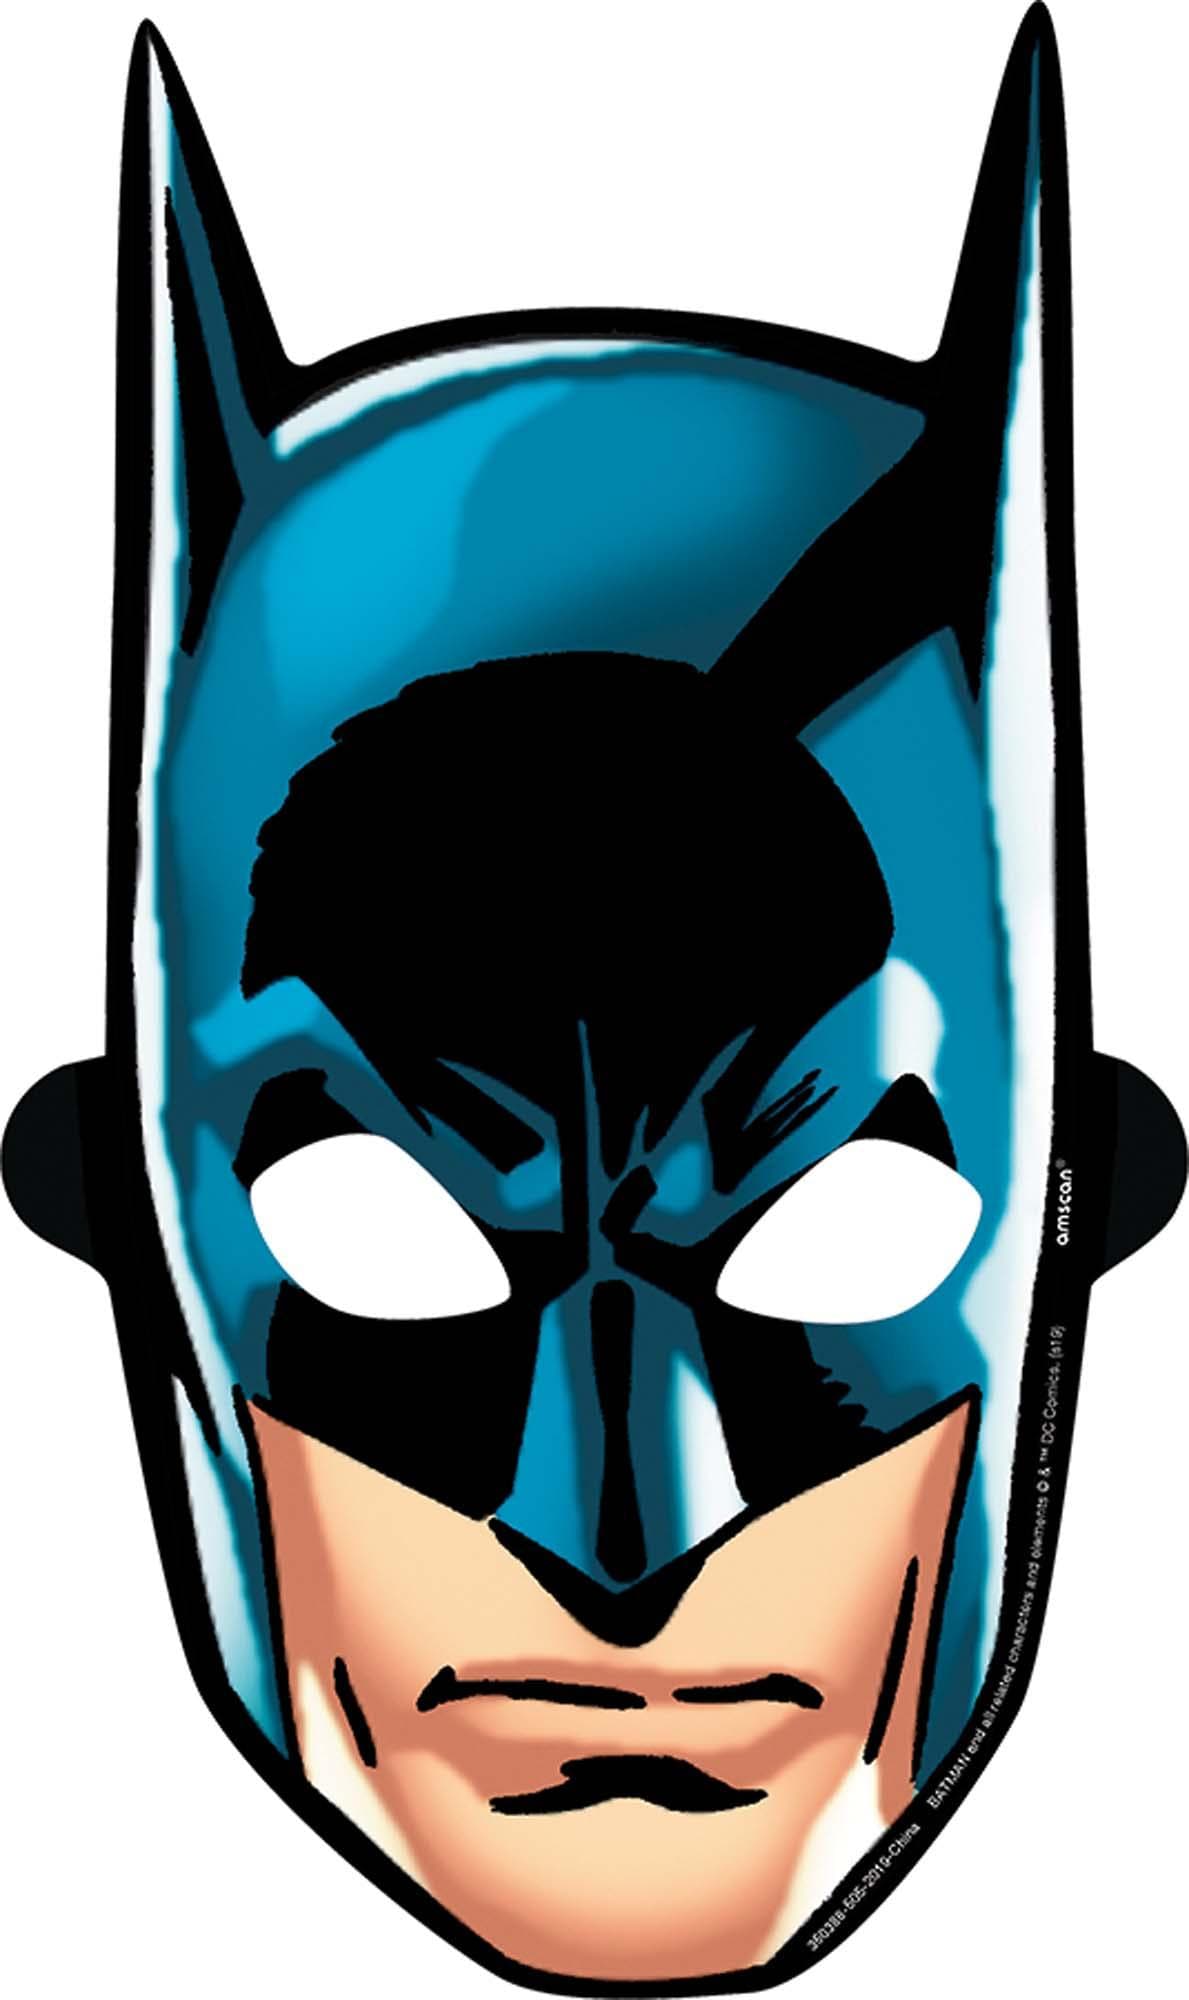 Buy Kids Birthday Batman paper masks, 8 per package sold at Party Expert